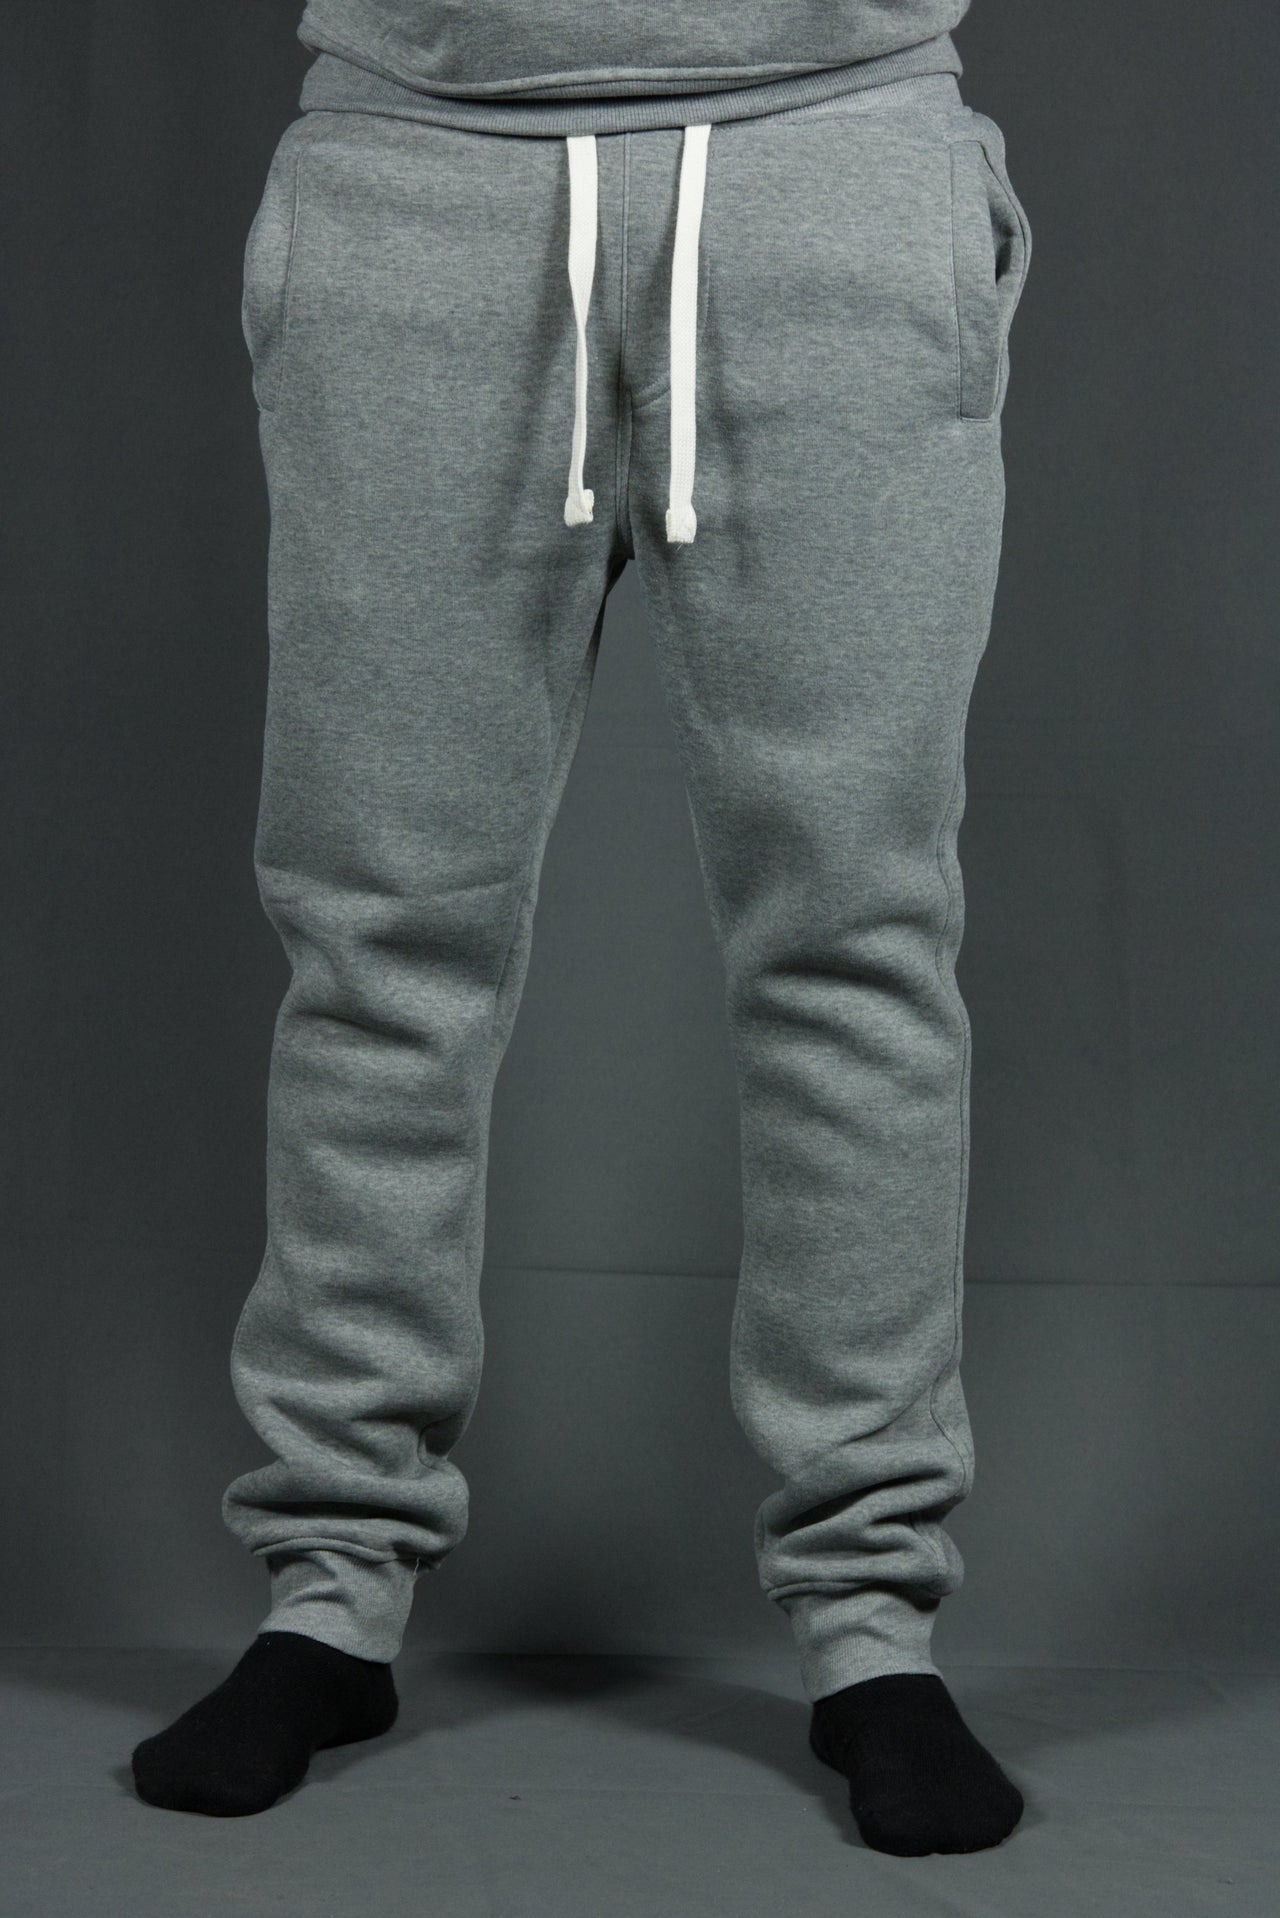 These suede fleece heather grey joggers are solid heather grey with two front pockets